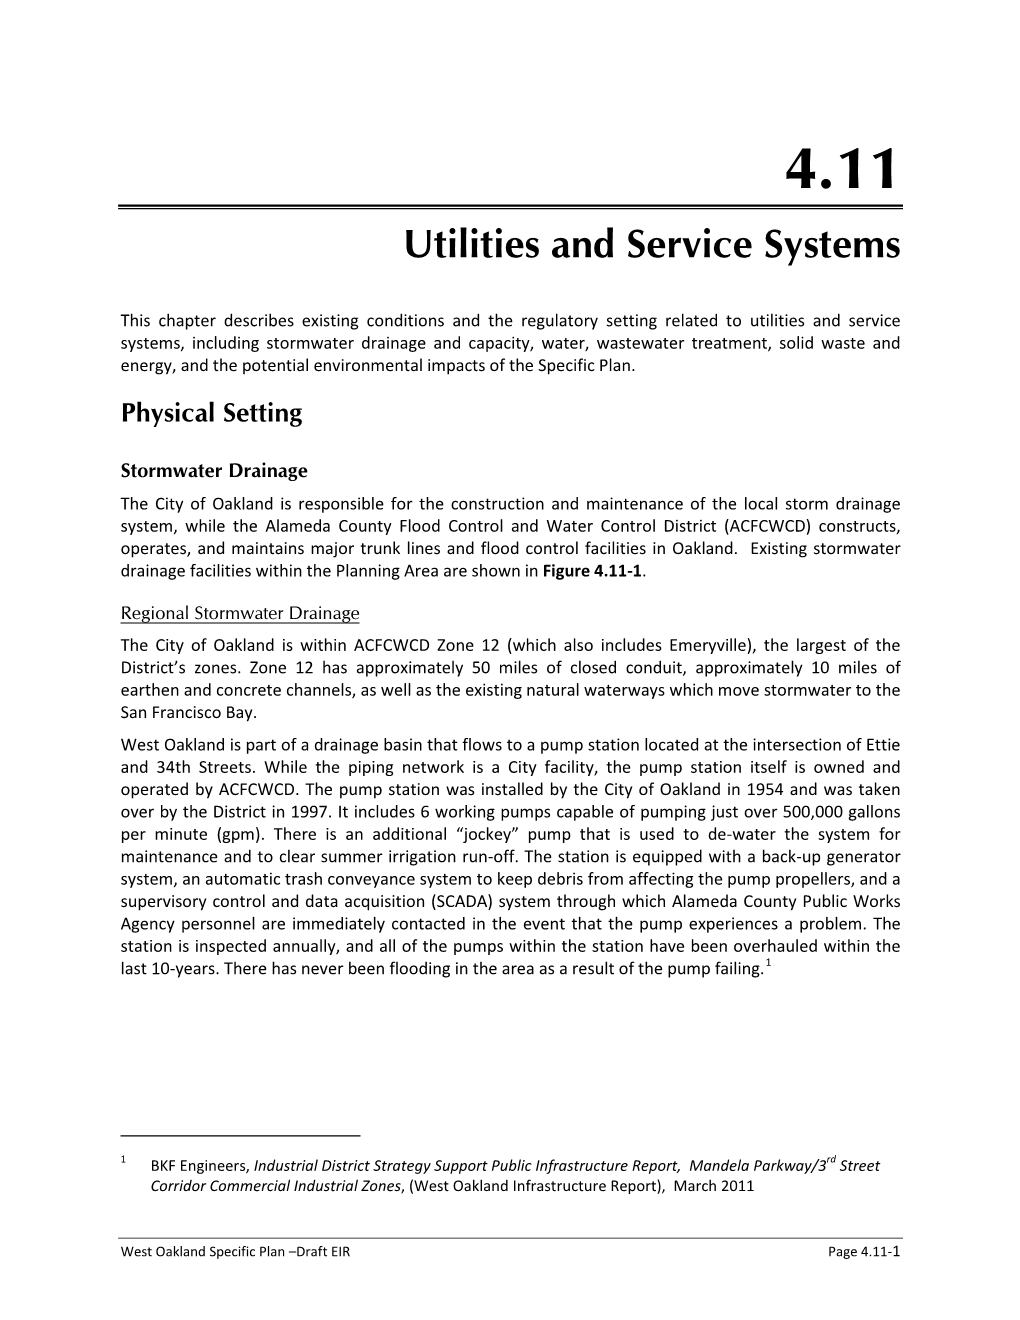 Utilities and Service Systems